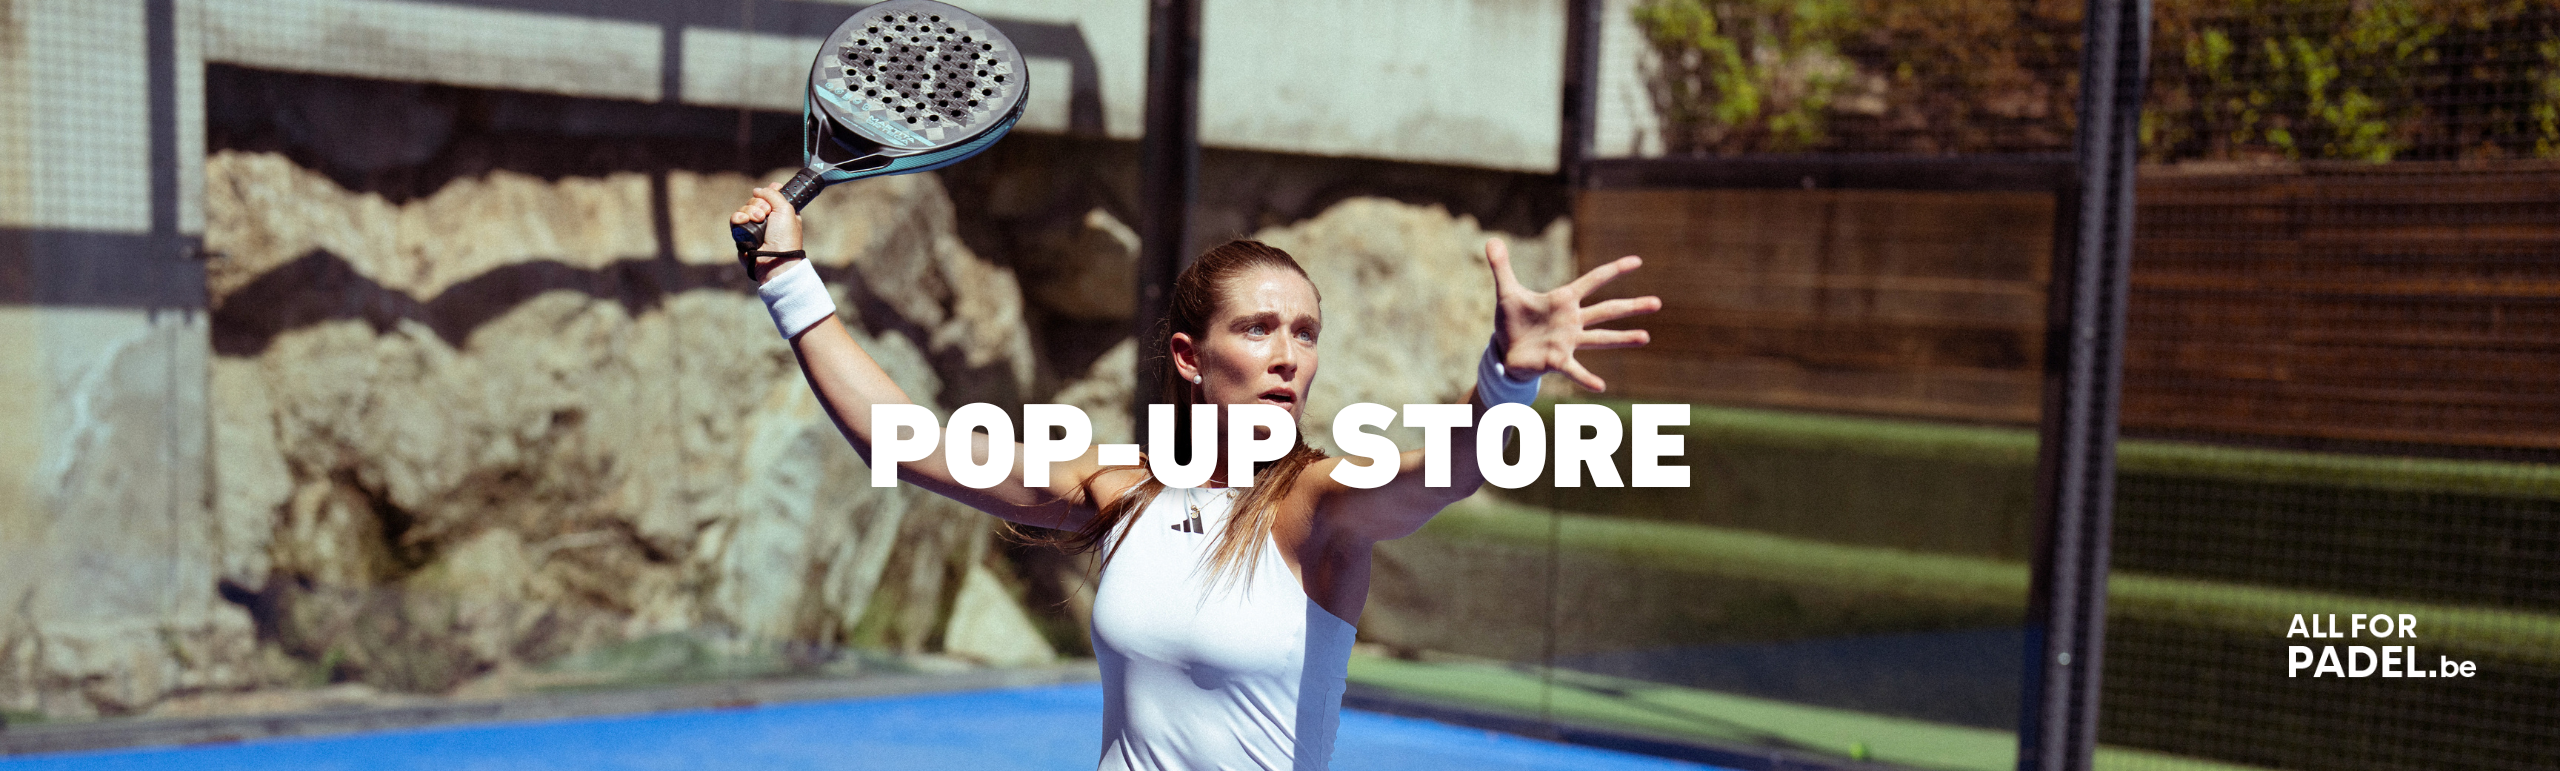 All For Padel Adidas pop-up store